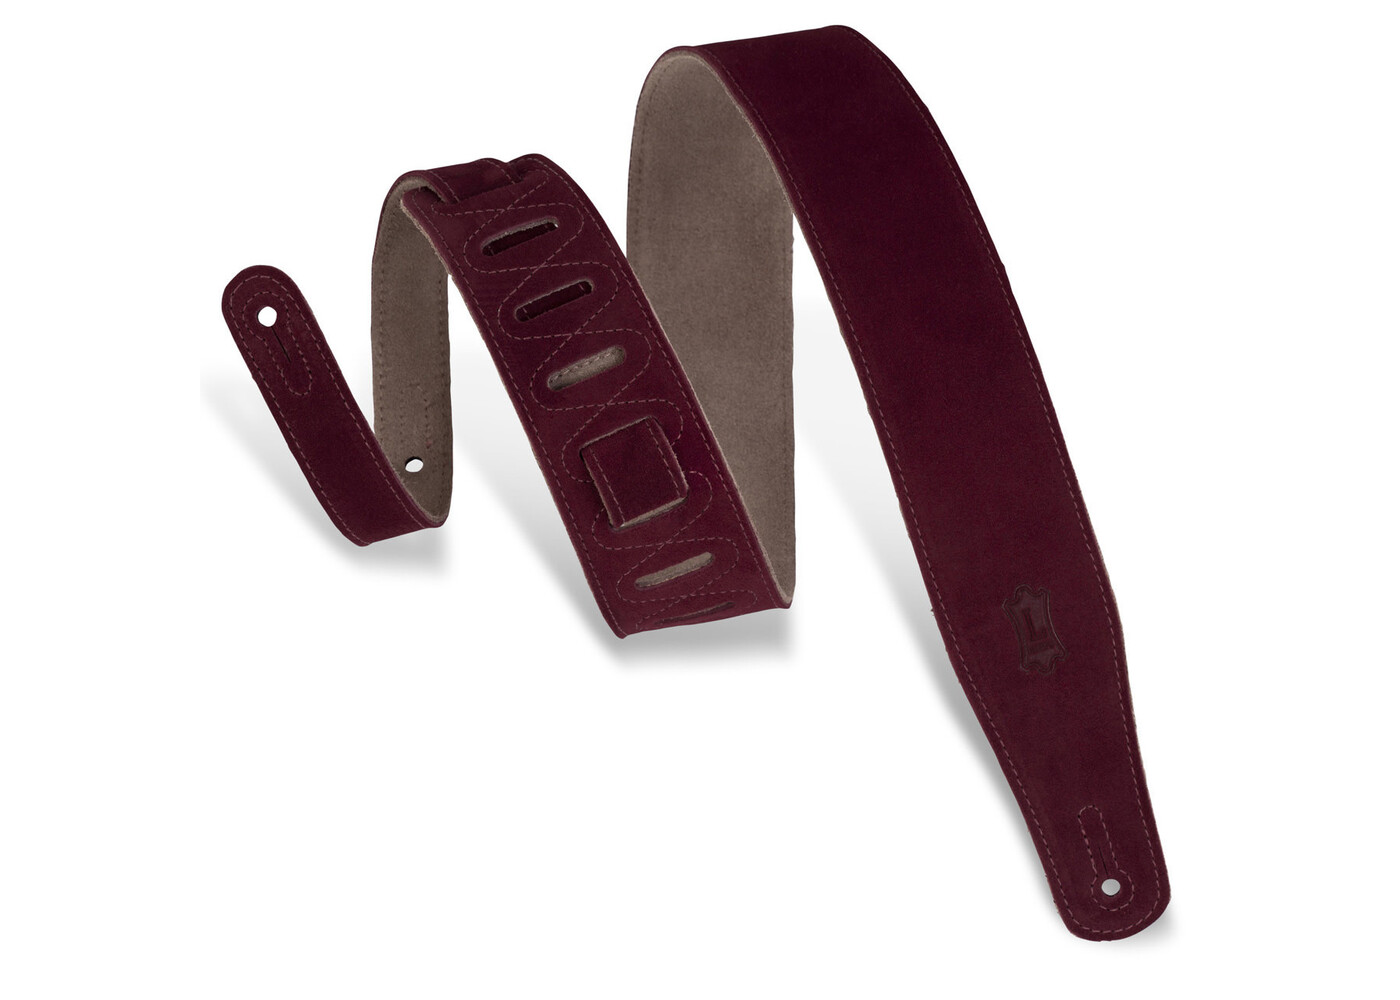 Levy's Levy's Classic Series Guitar Strap - Burgundy